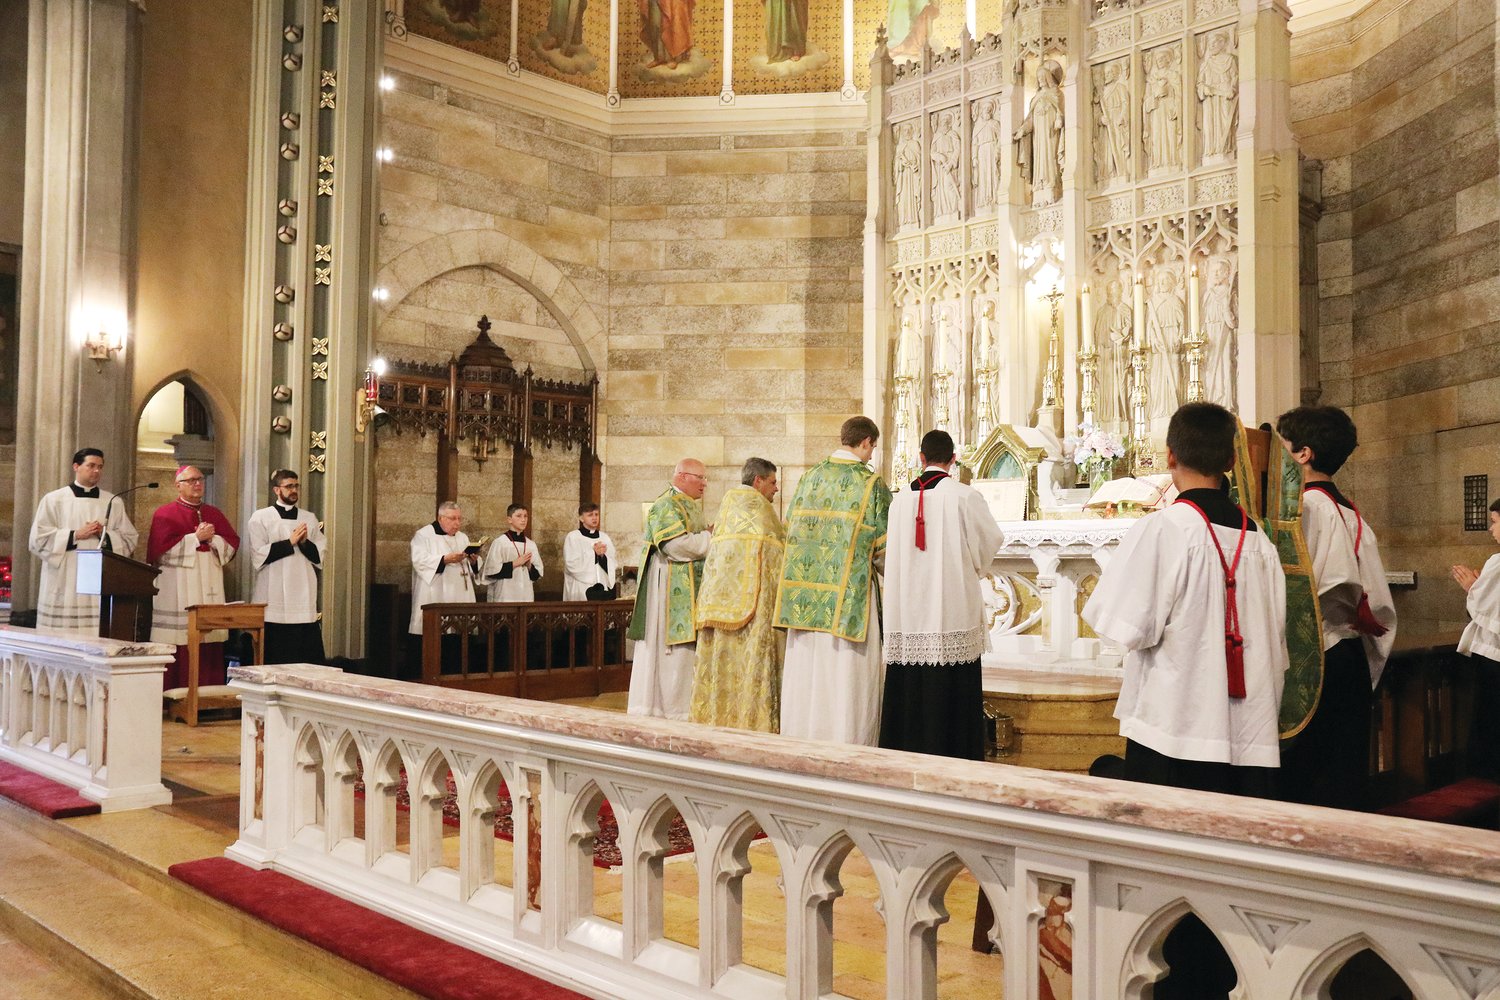 Bishop Thomas J. Tobin attended the Mass, in choir, at left, along with his master of ceremonies and a diocesan seminarian, as Father John Berg celebrates Mass in the traditional Latin form.